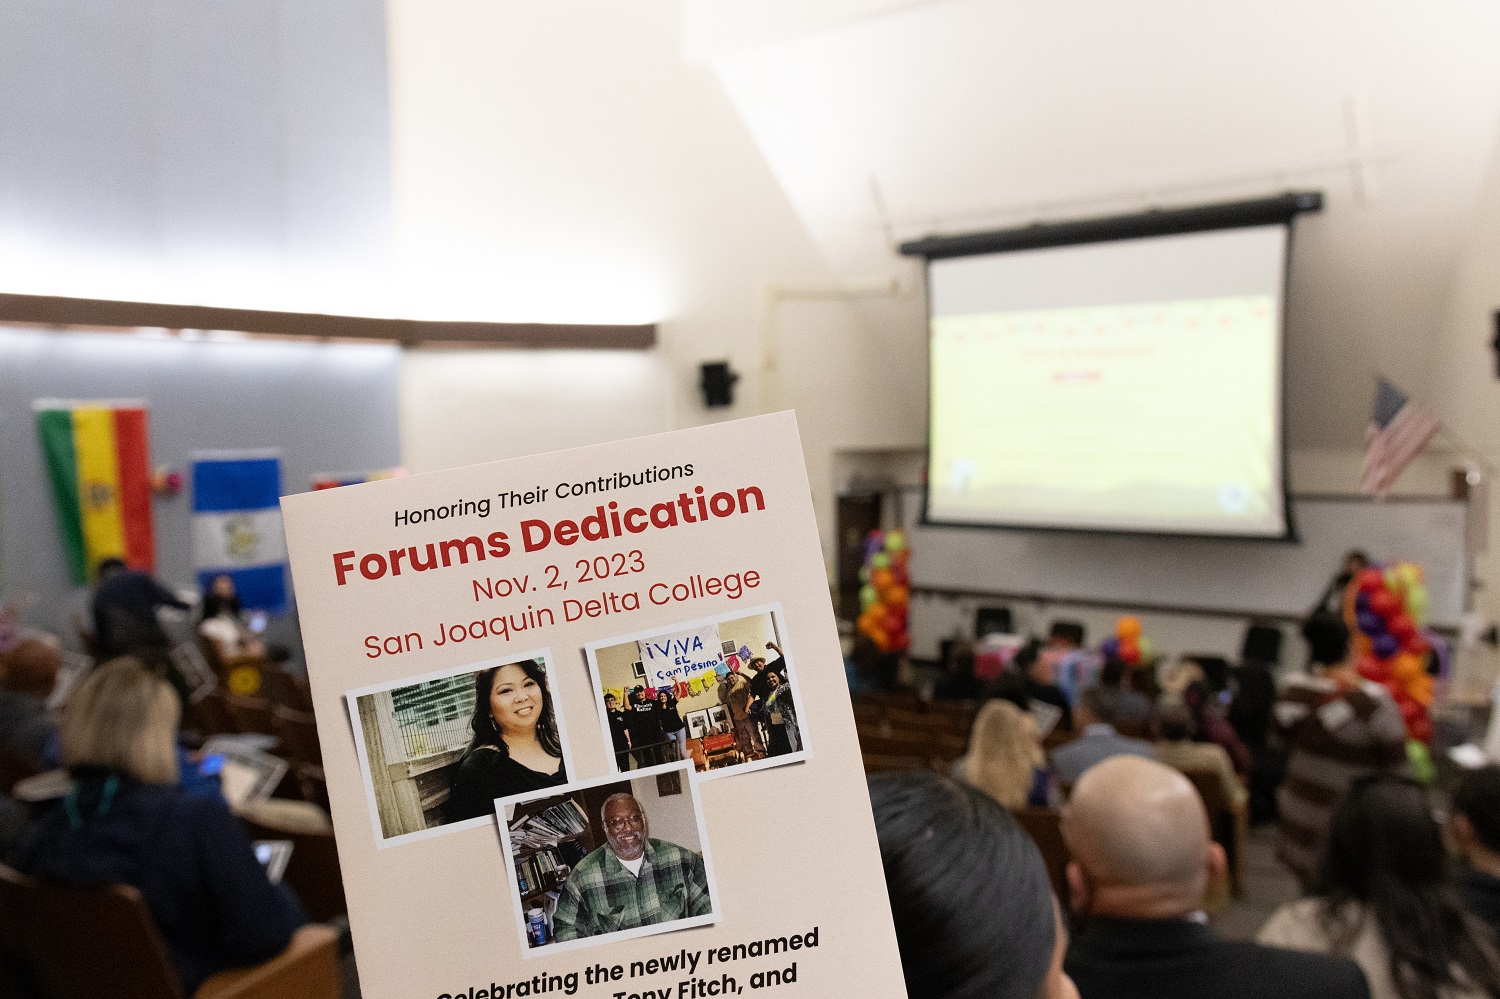 Three forums were renamed at Delta College to honor the contributions of community members.